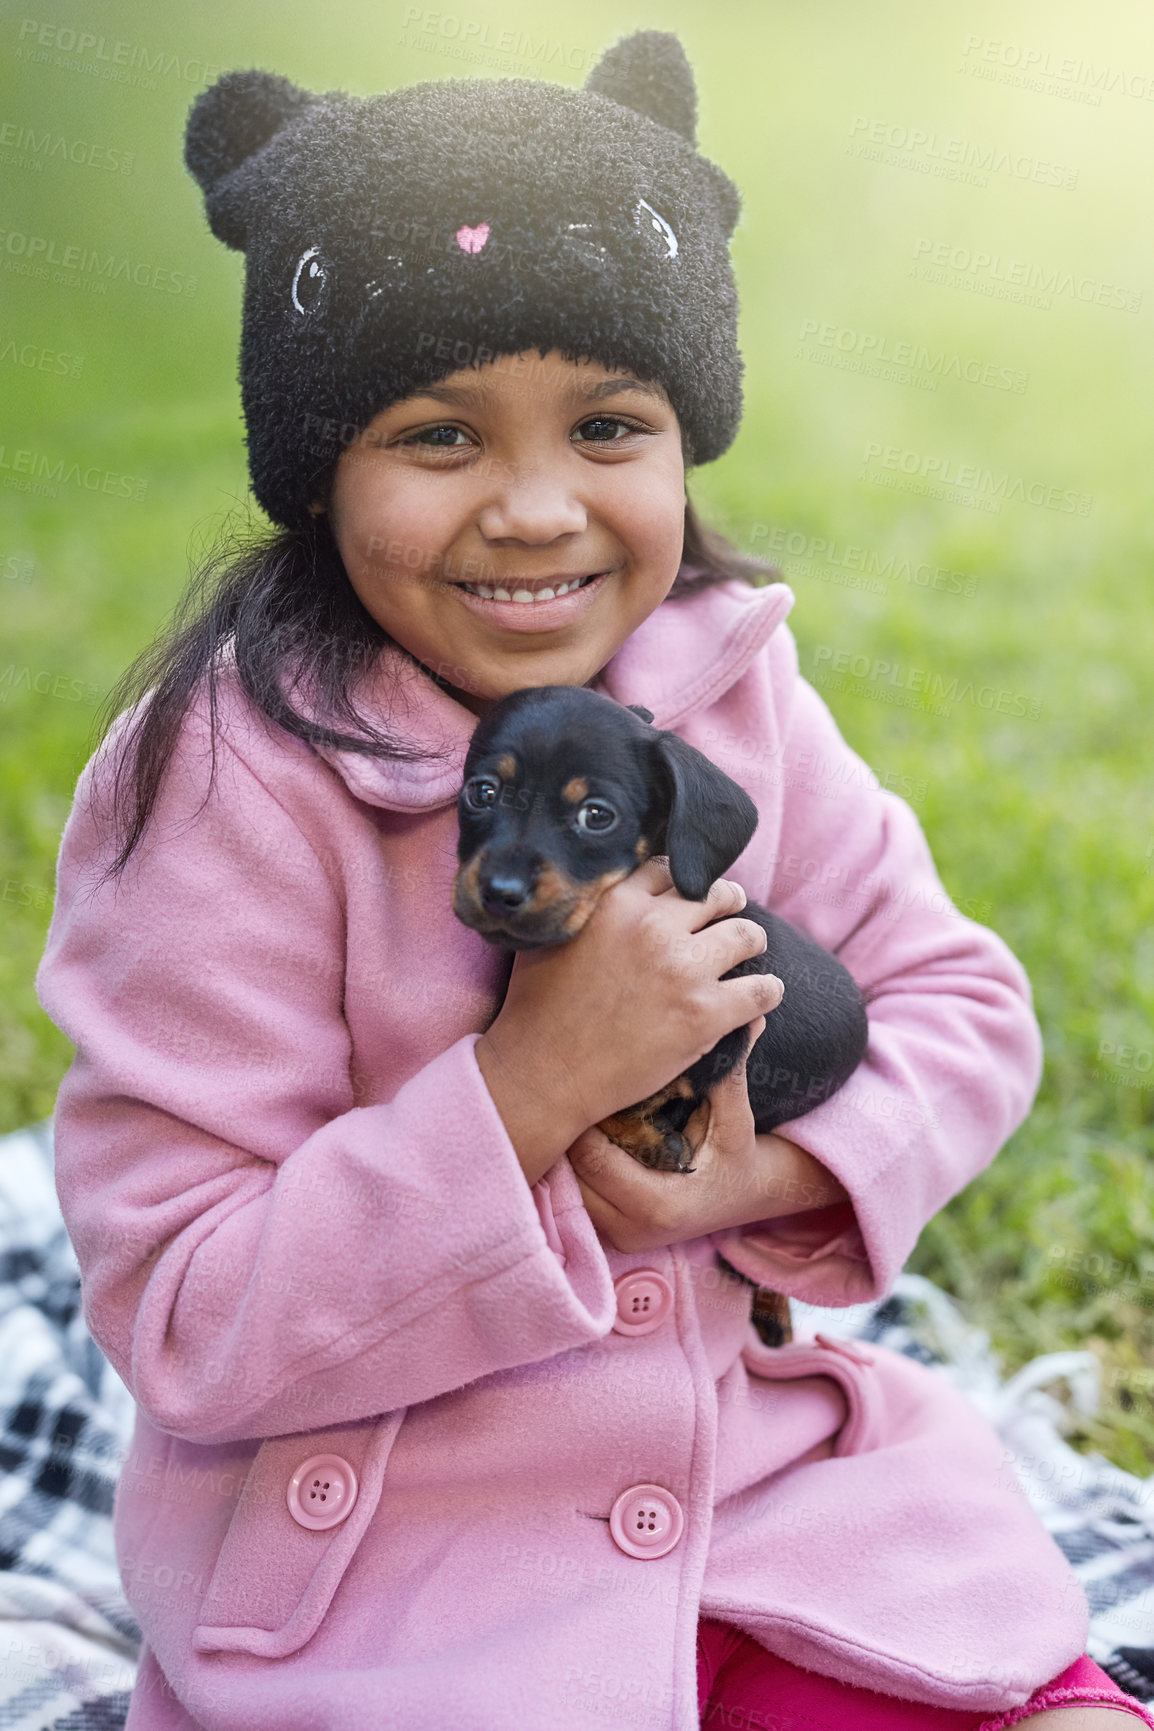 Buy stock photo Portrait, hug and happy child with dog outdoor for love, care and bonding together with pet animal at park. Smile, kid and embrace puppy at garden, friends and girl with dachshund on grass in Mexico